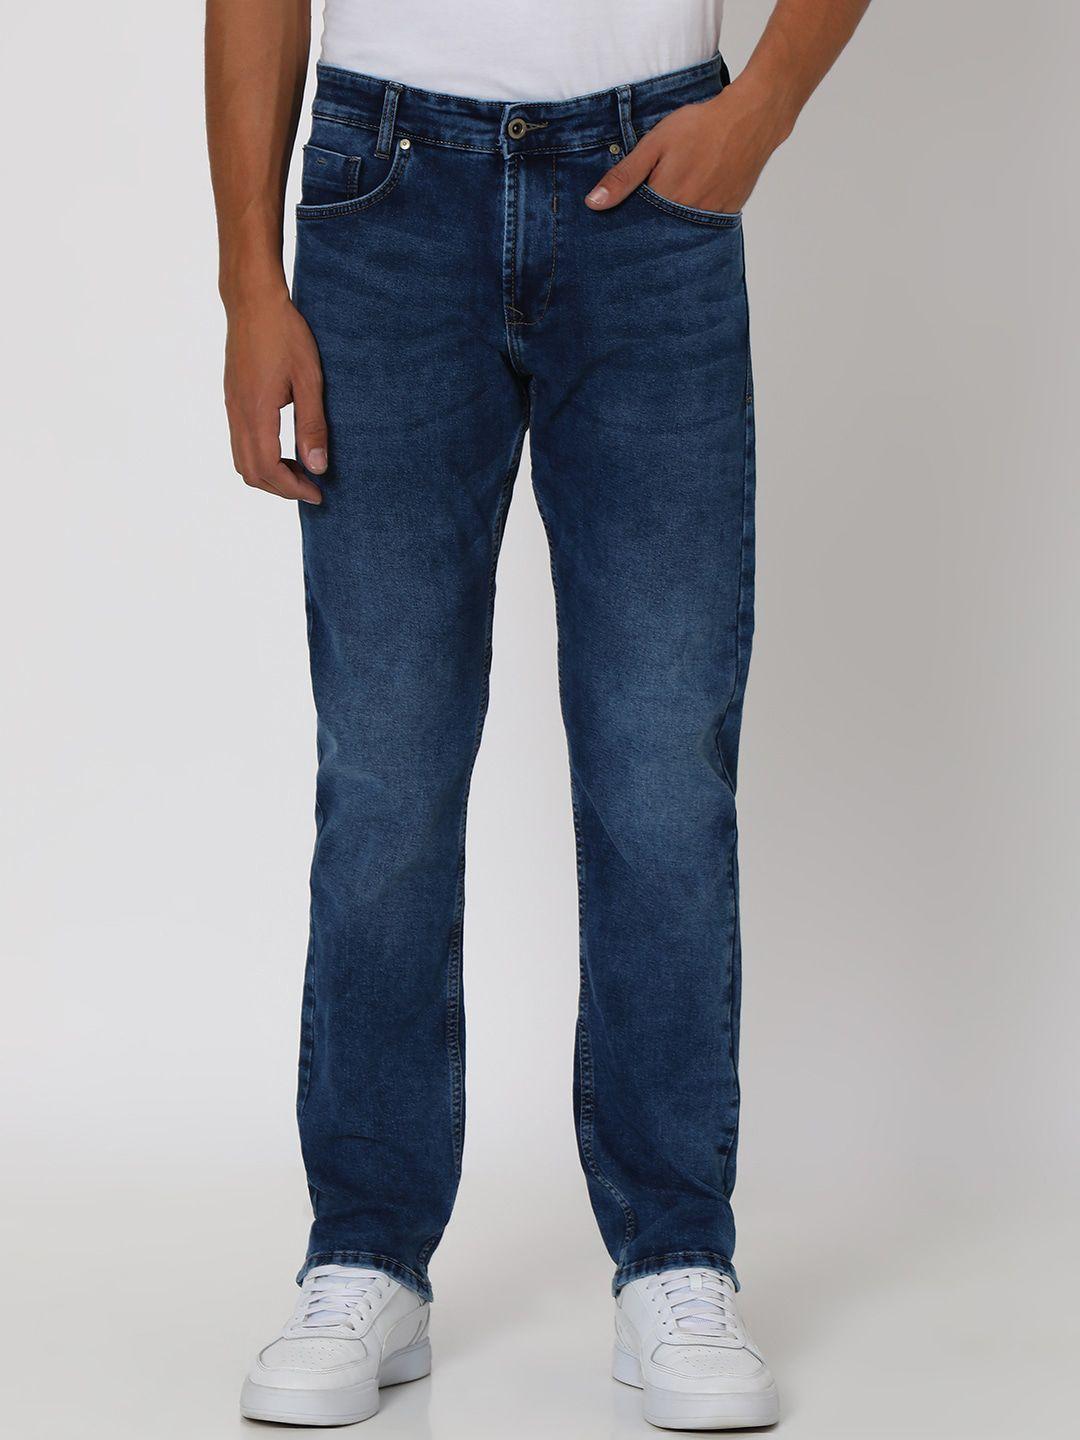 mufti-men-relaxed-fit-mid-rise-light-fade-clean-look-stretchable-jeans